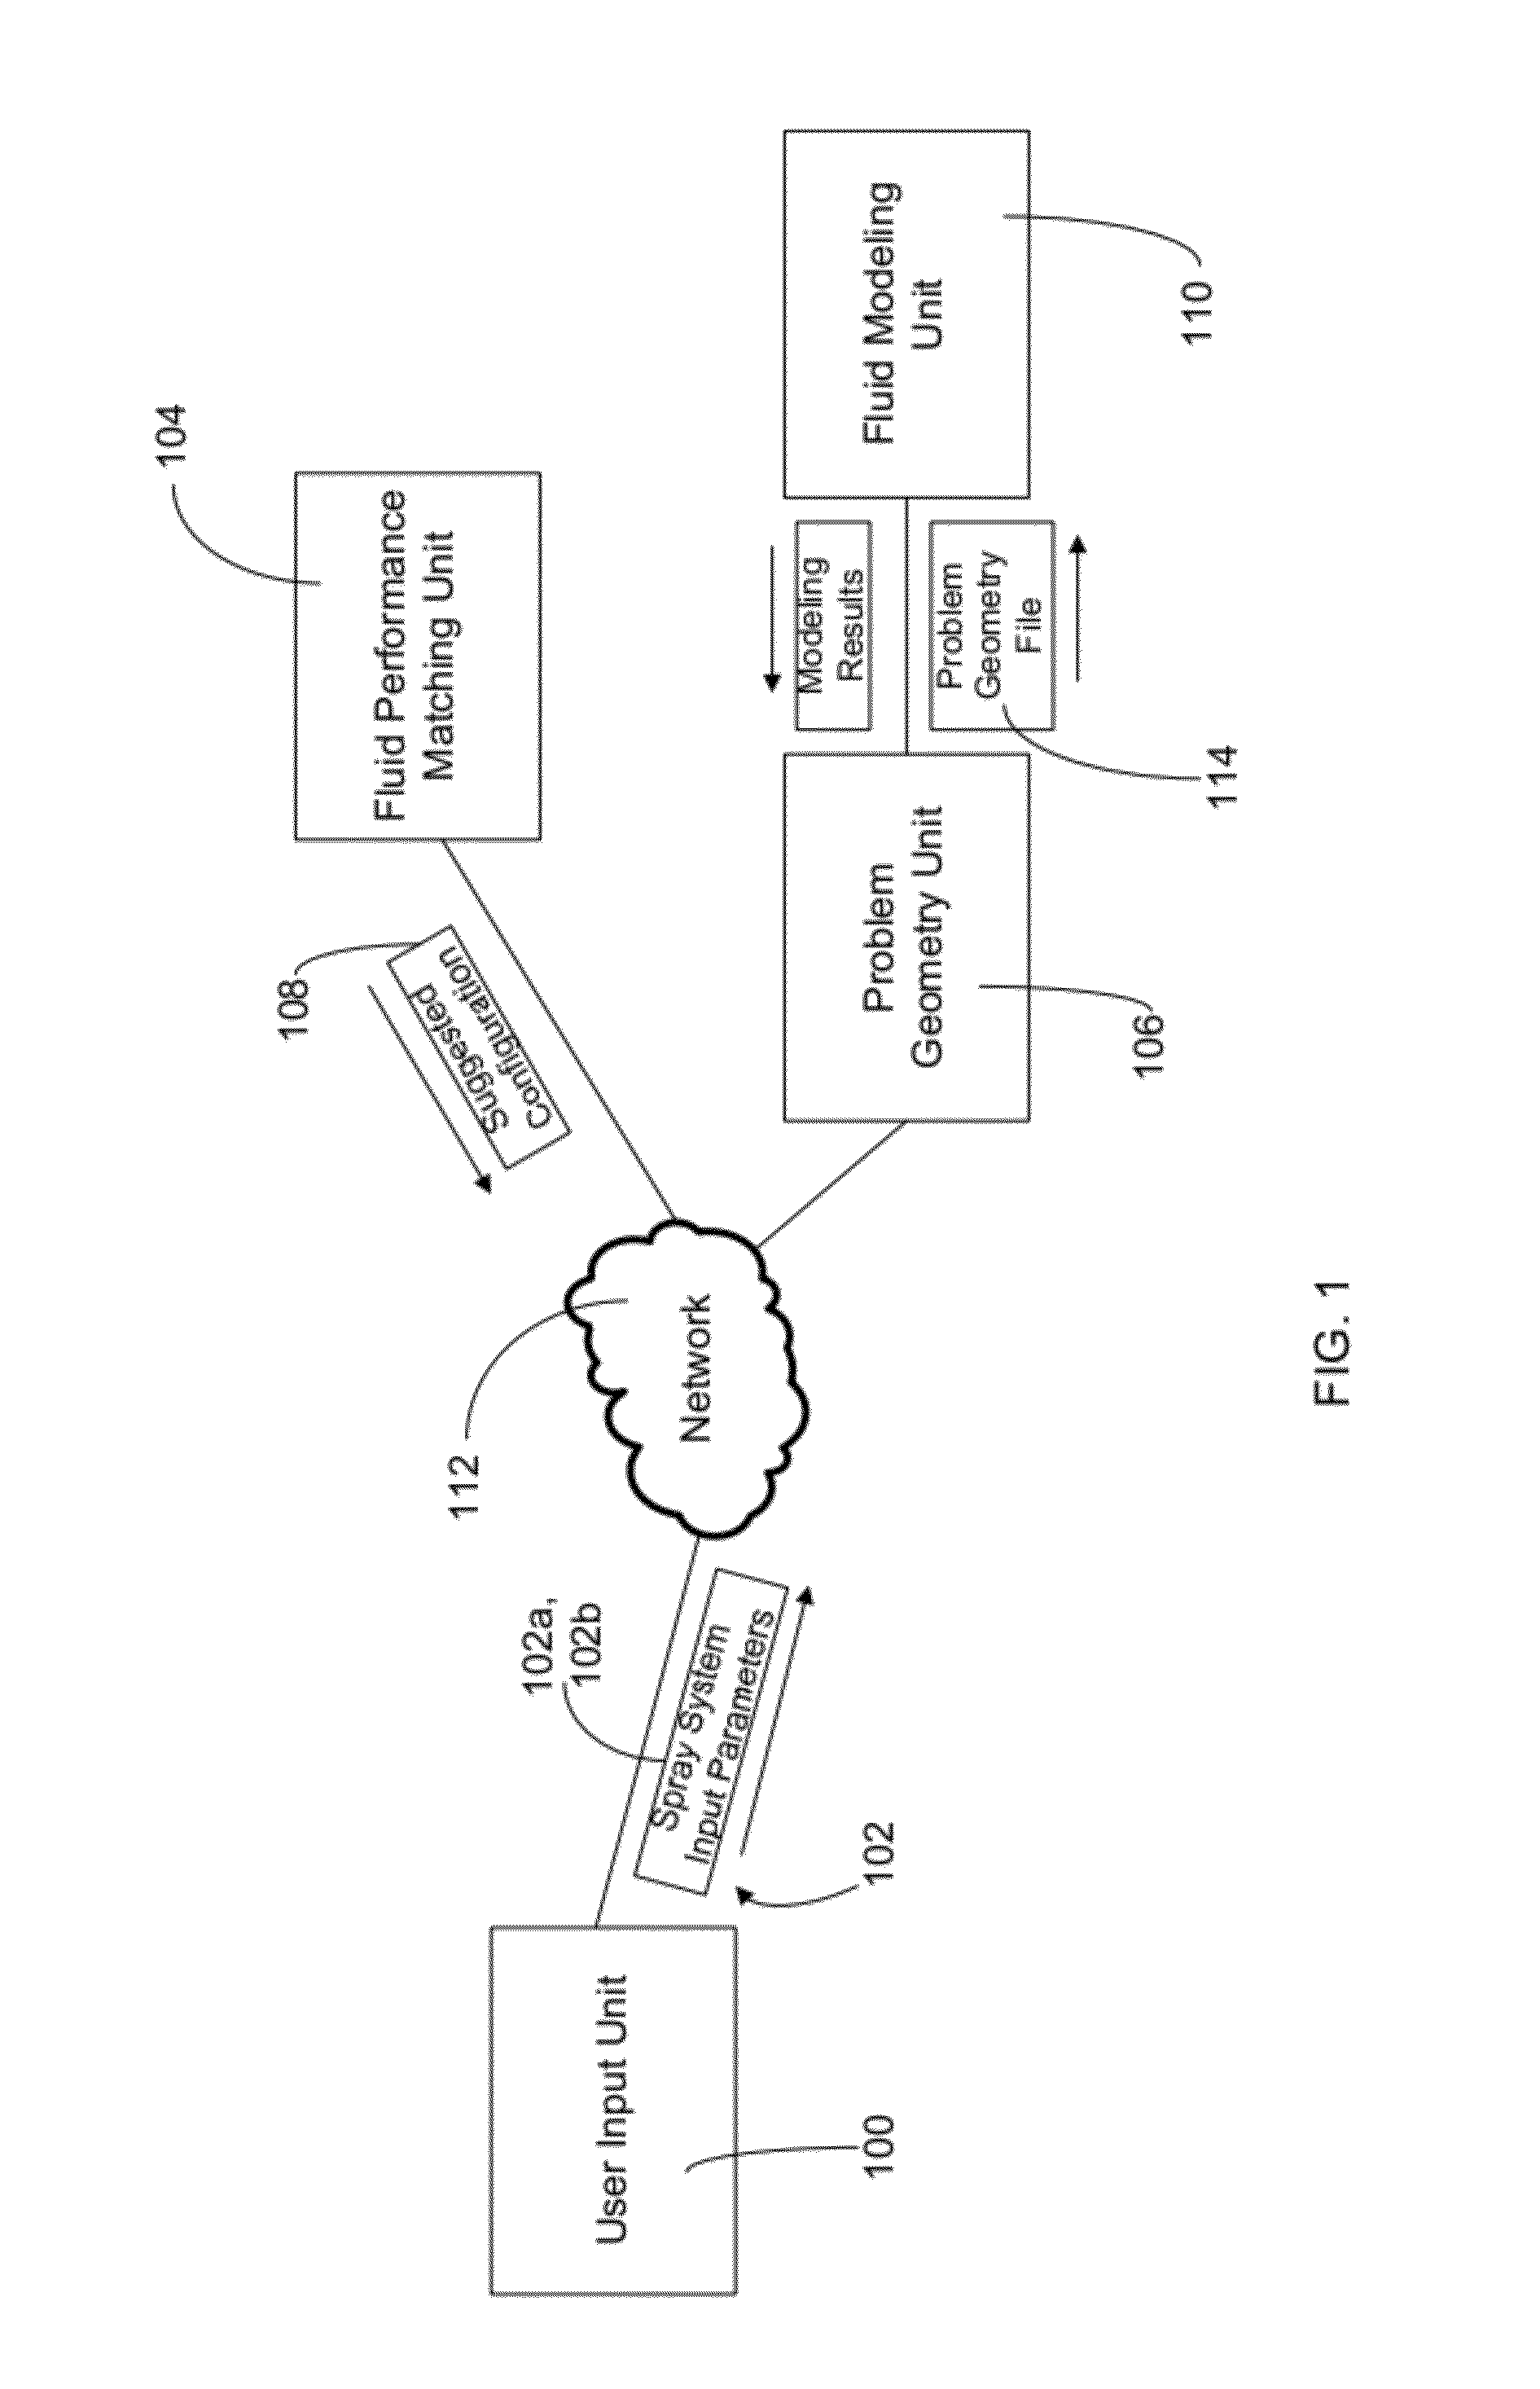 Spray nozzle configuration and modeling system